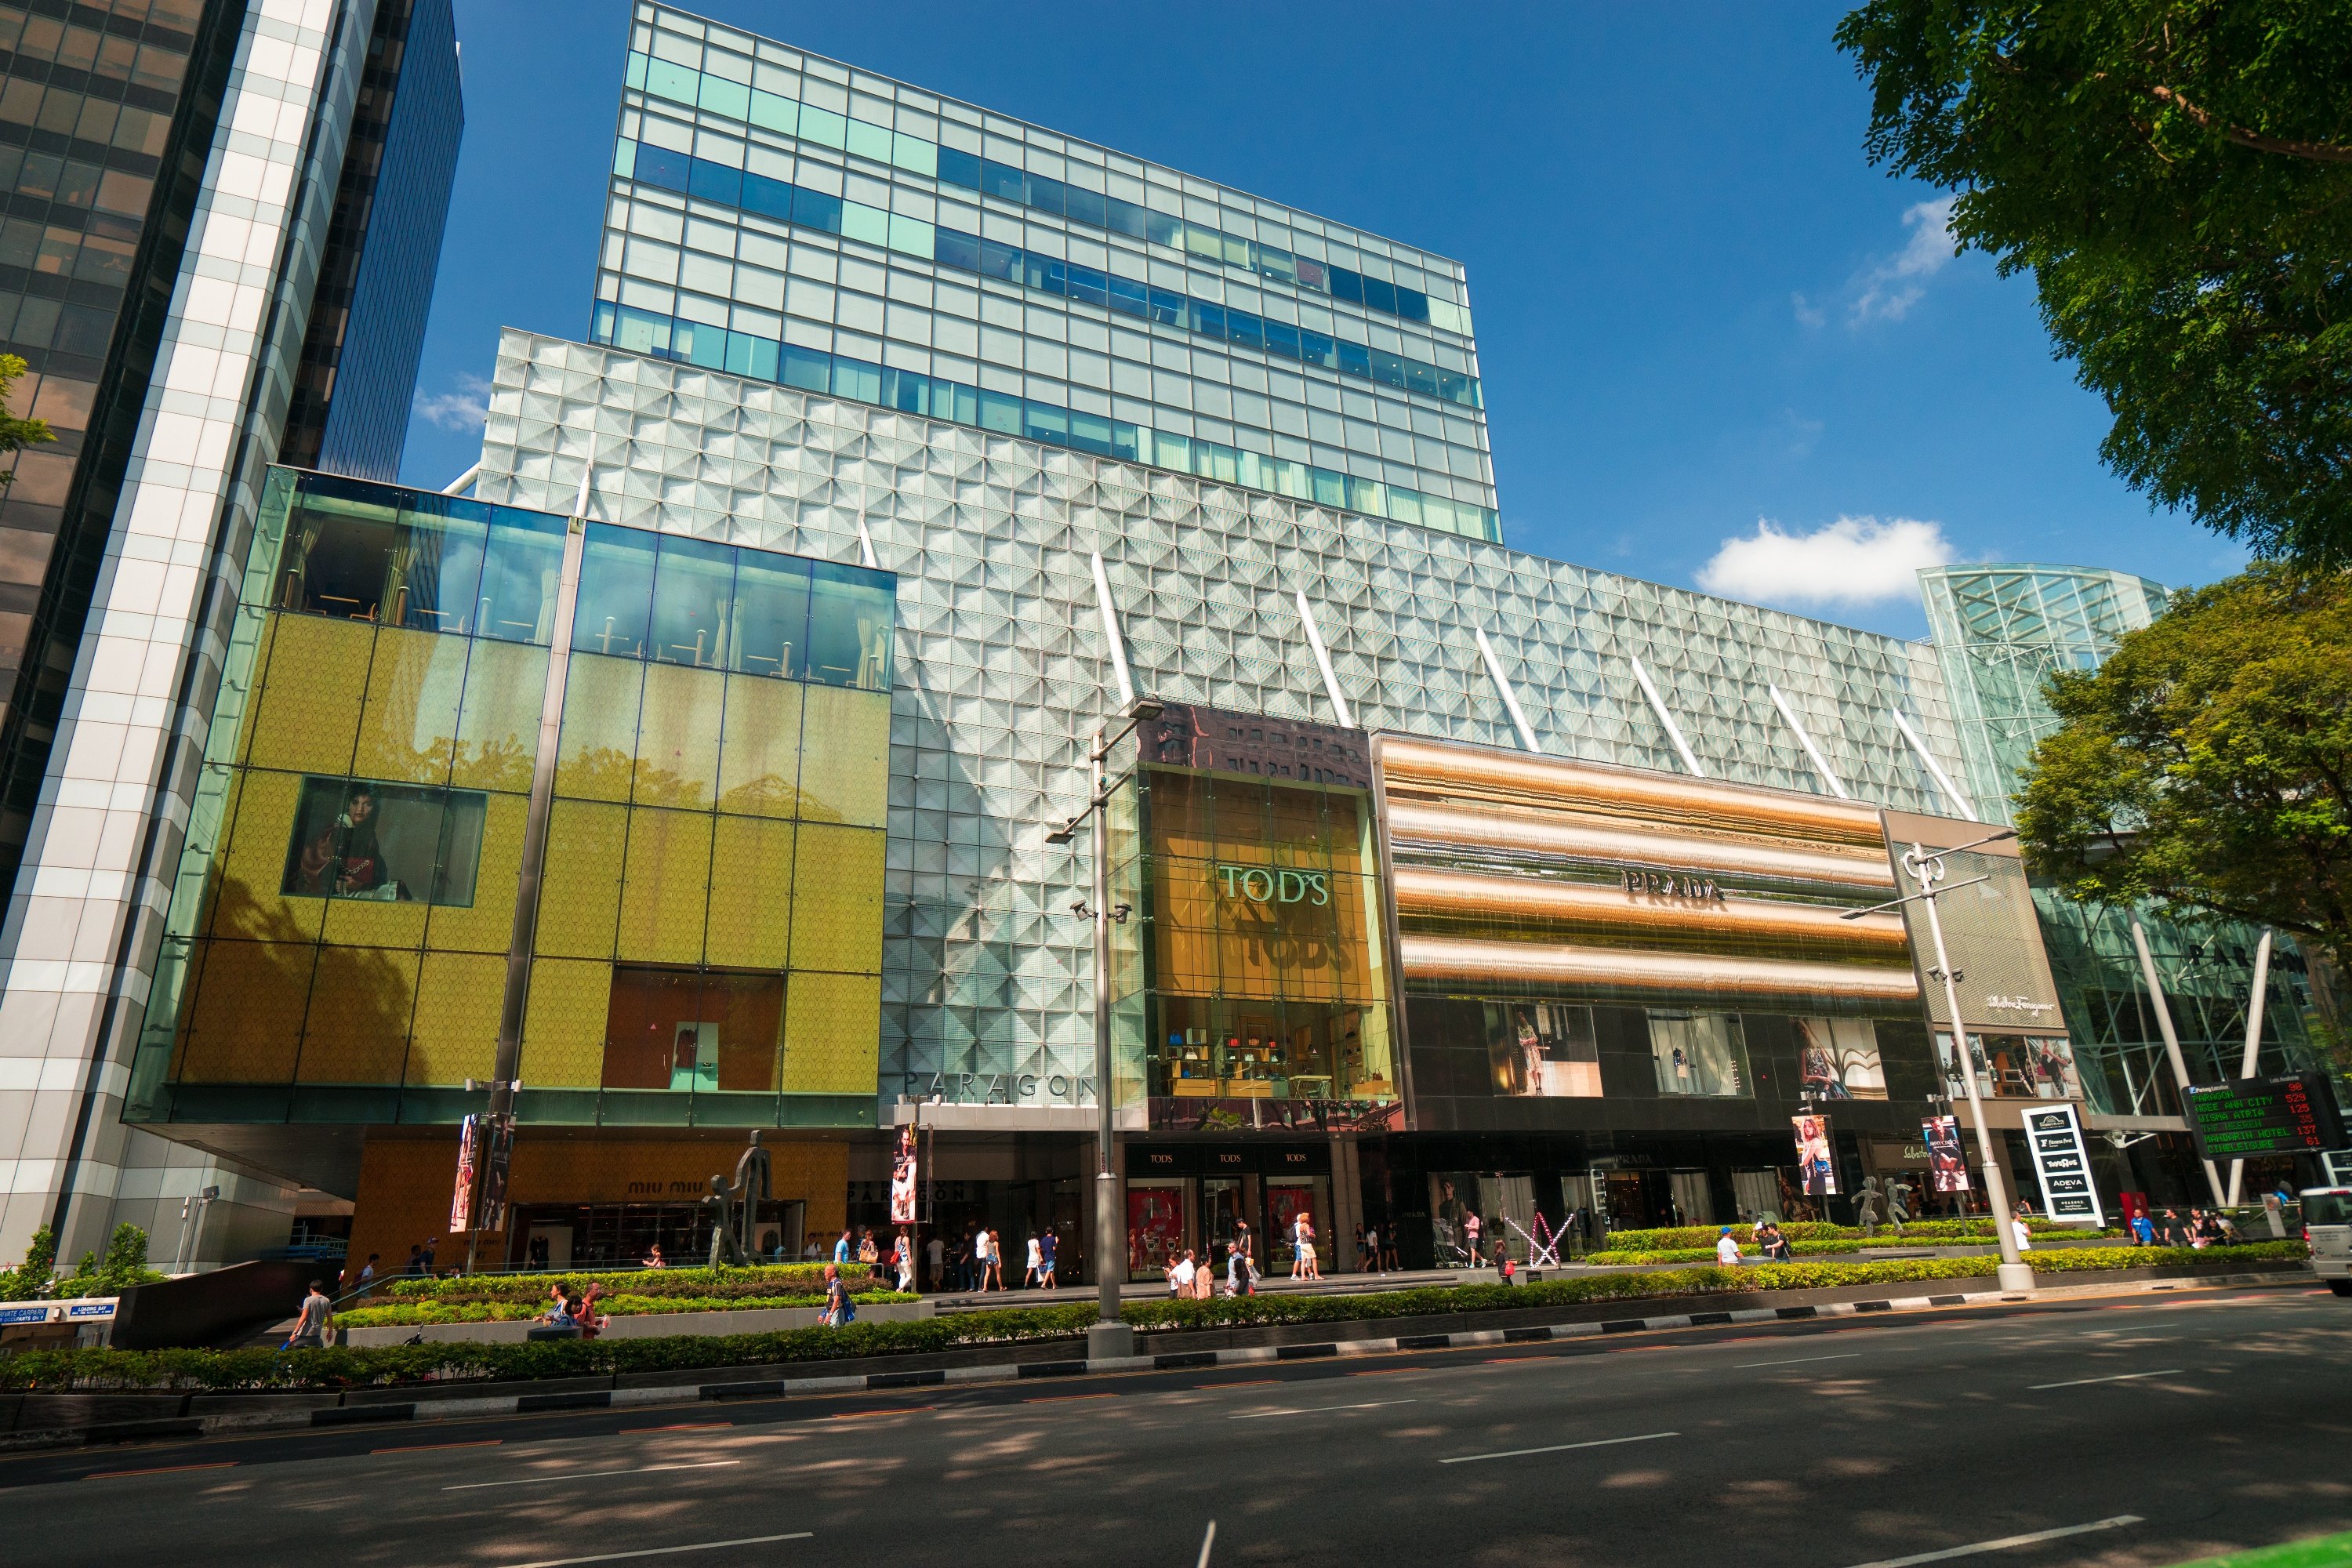 Ngee Ann City Singapore Orchard road people modern fashion luxury